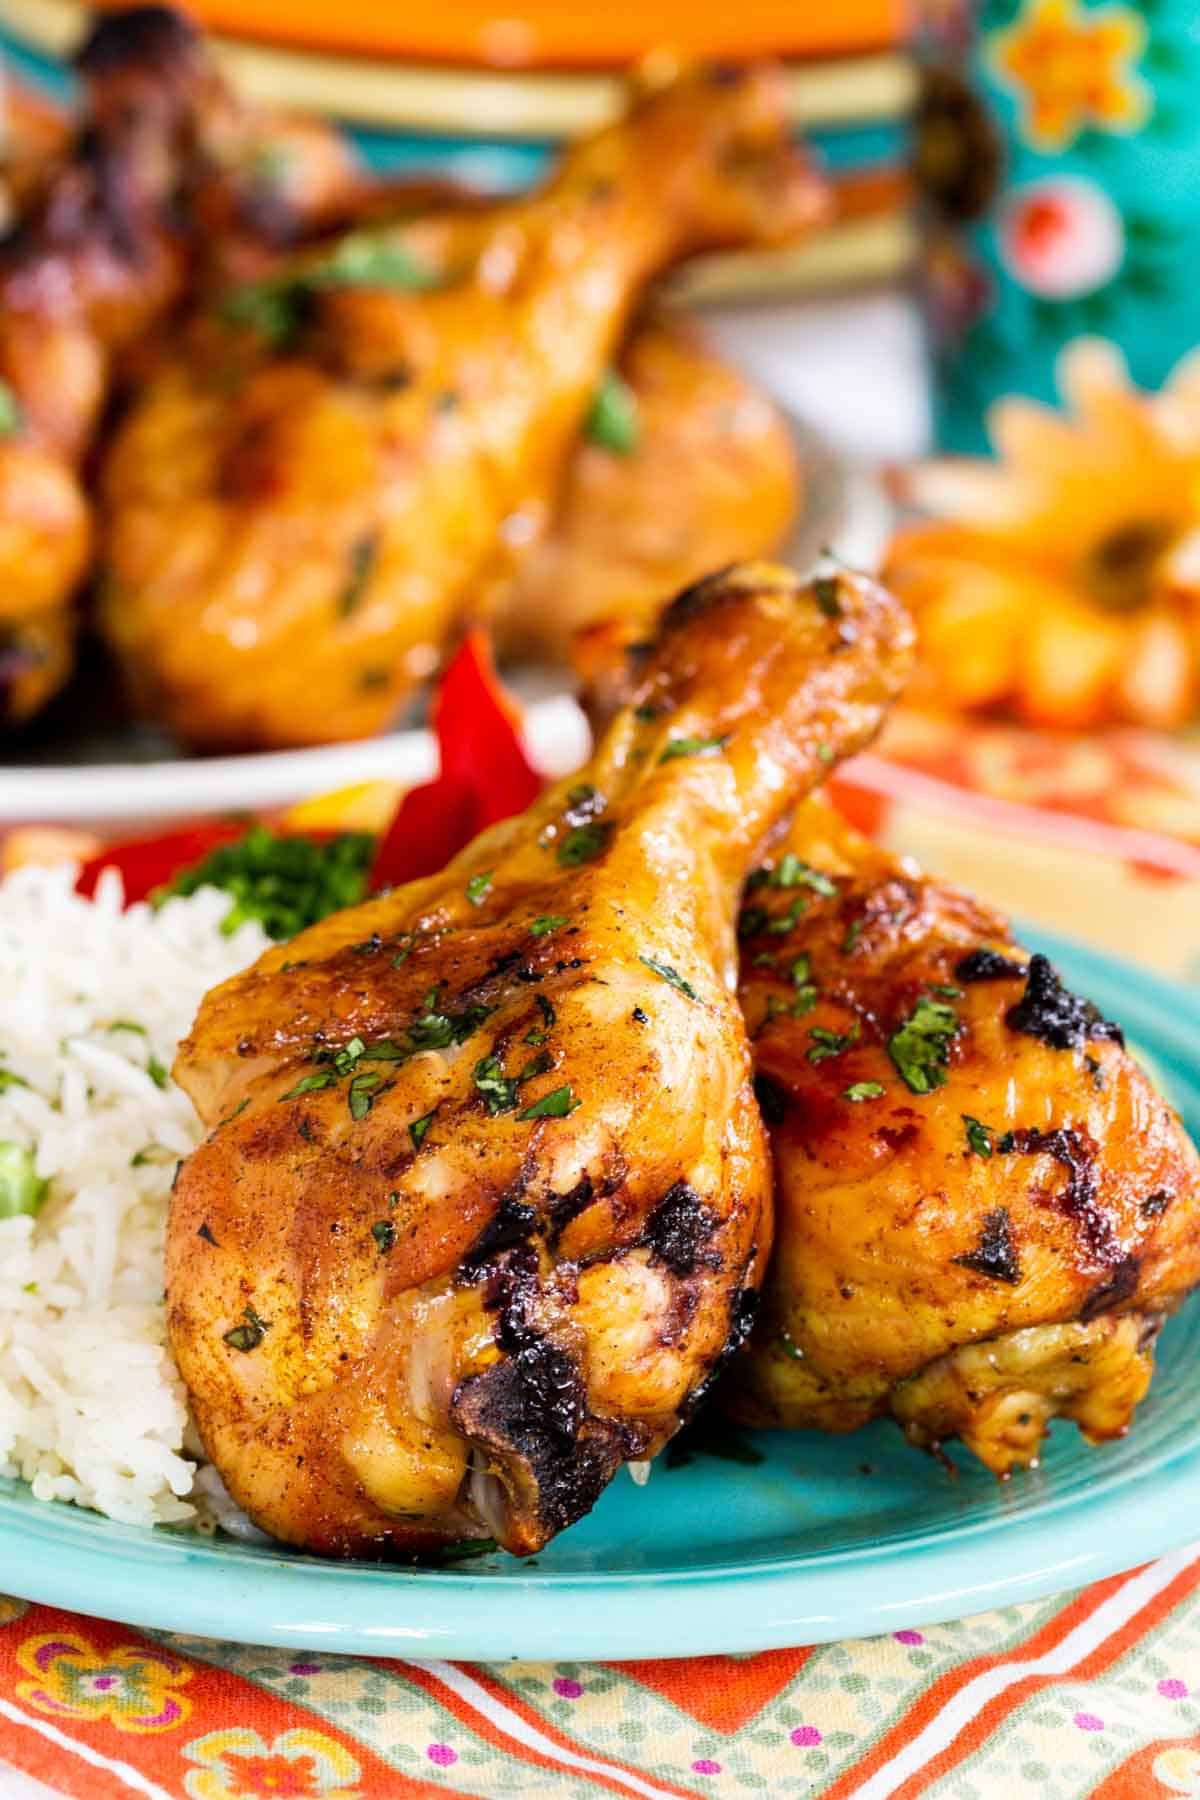 Grilled tandoori chicken legs on a plate with rice.